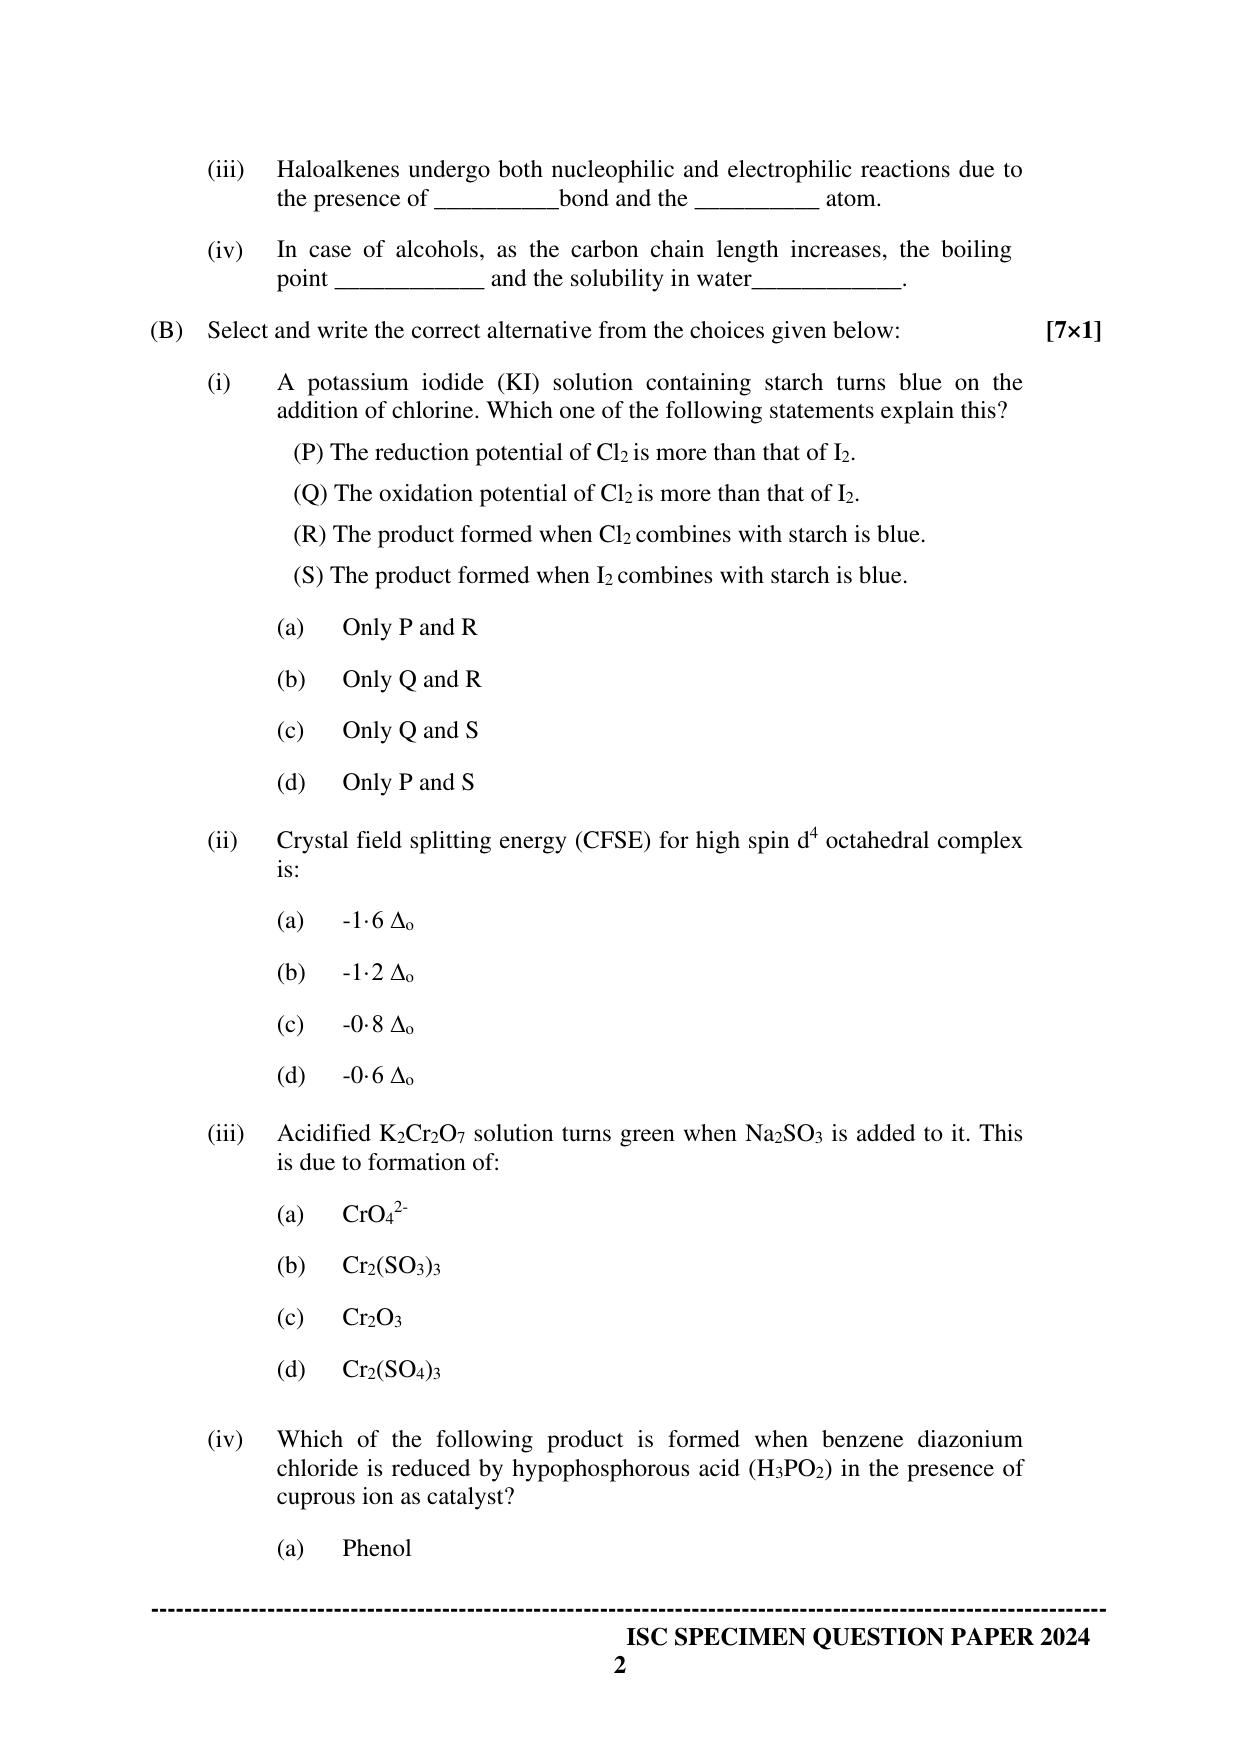 ISC Class 12 2024 CHEMISTRY PAPER 1 Sample Paper - Page 2